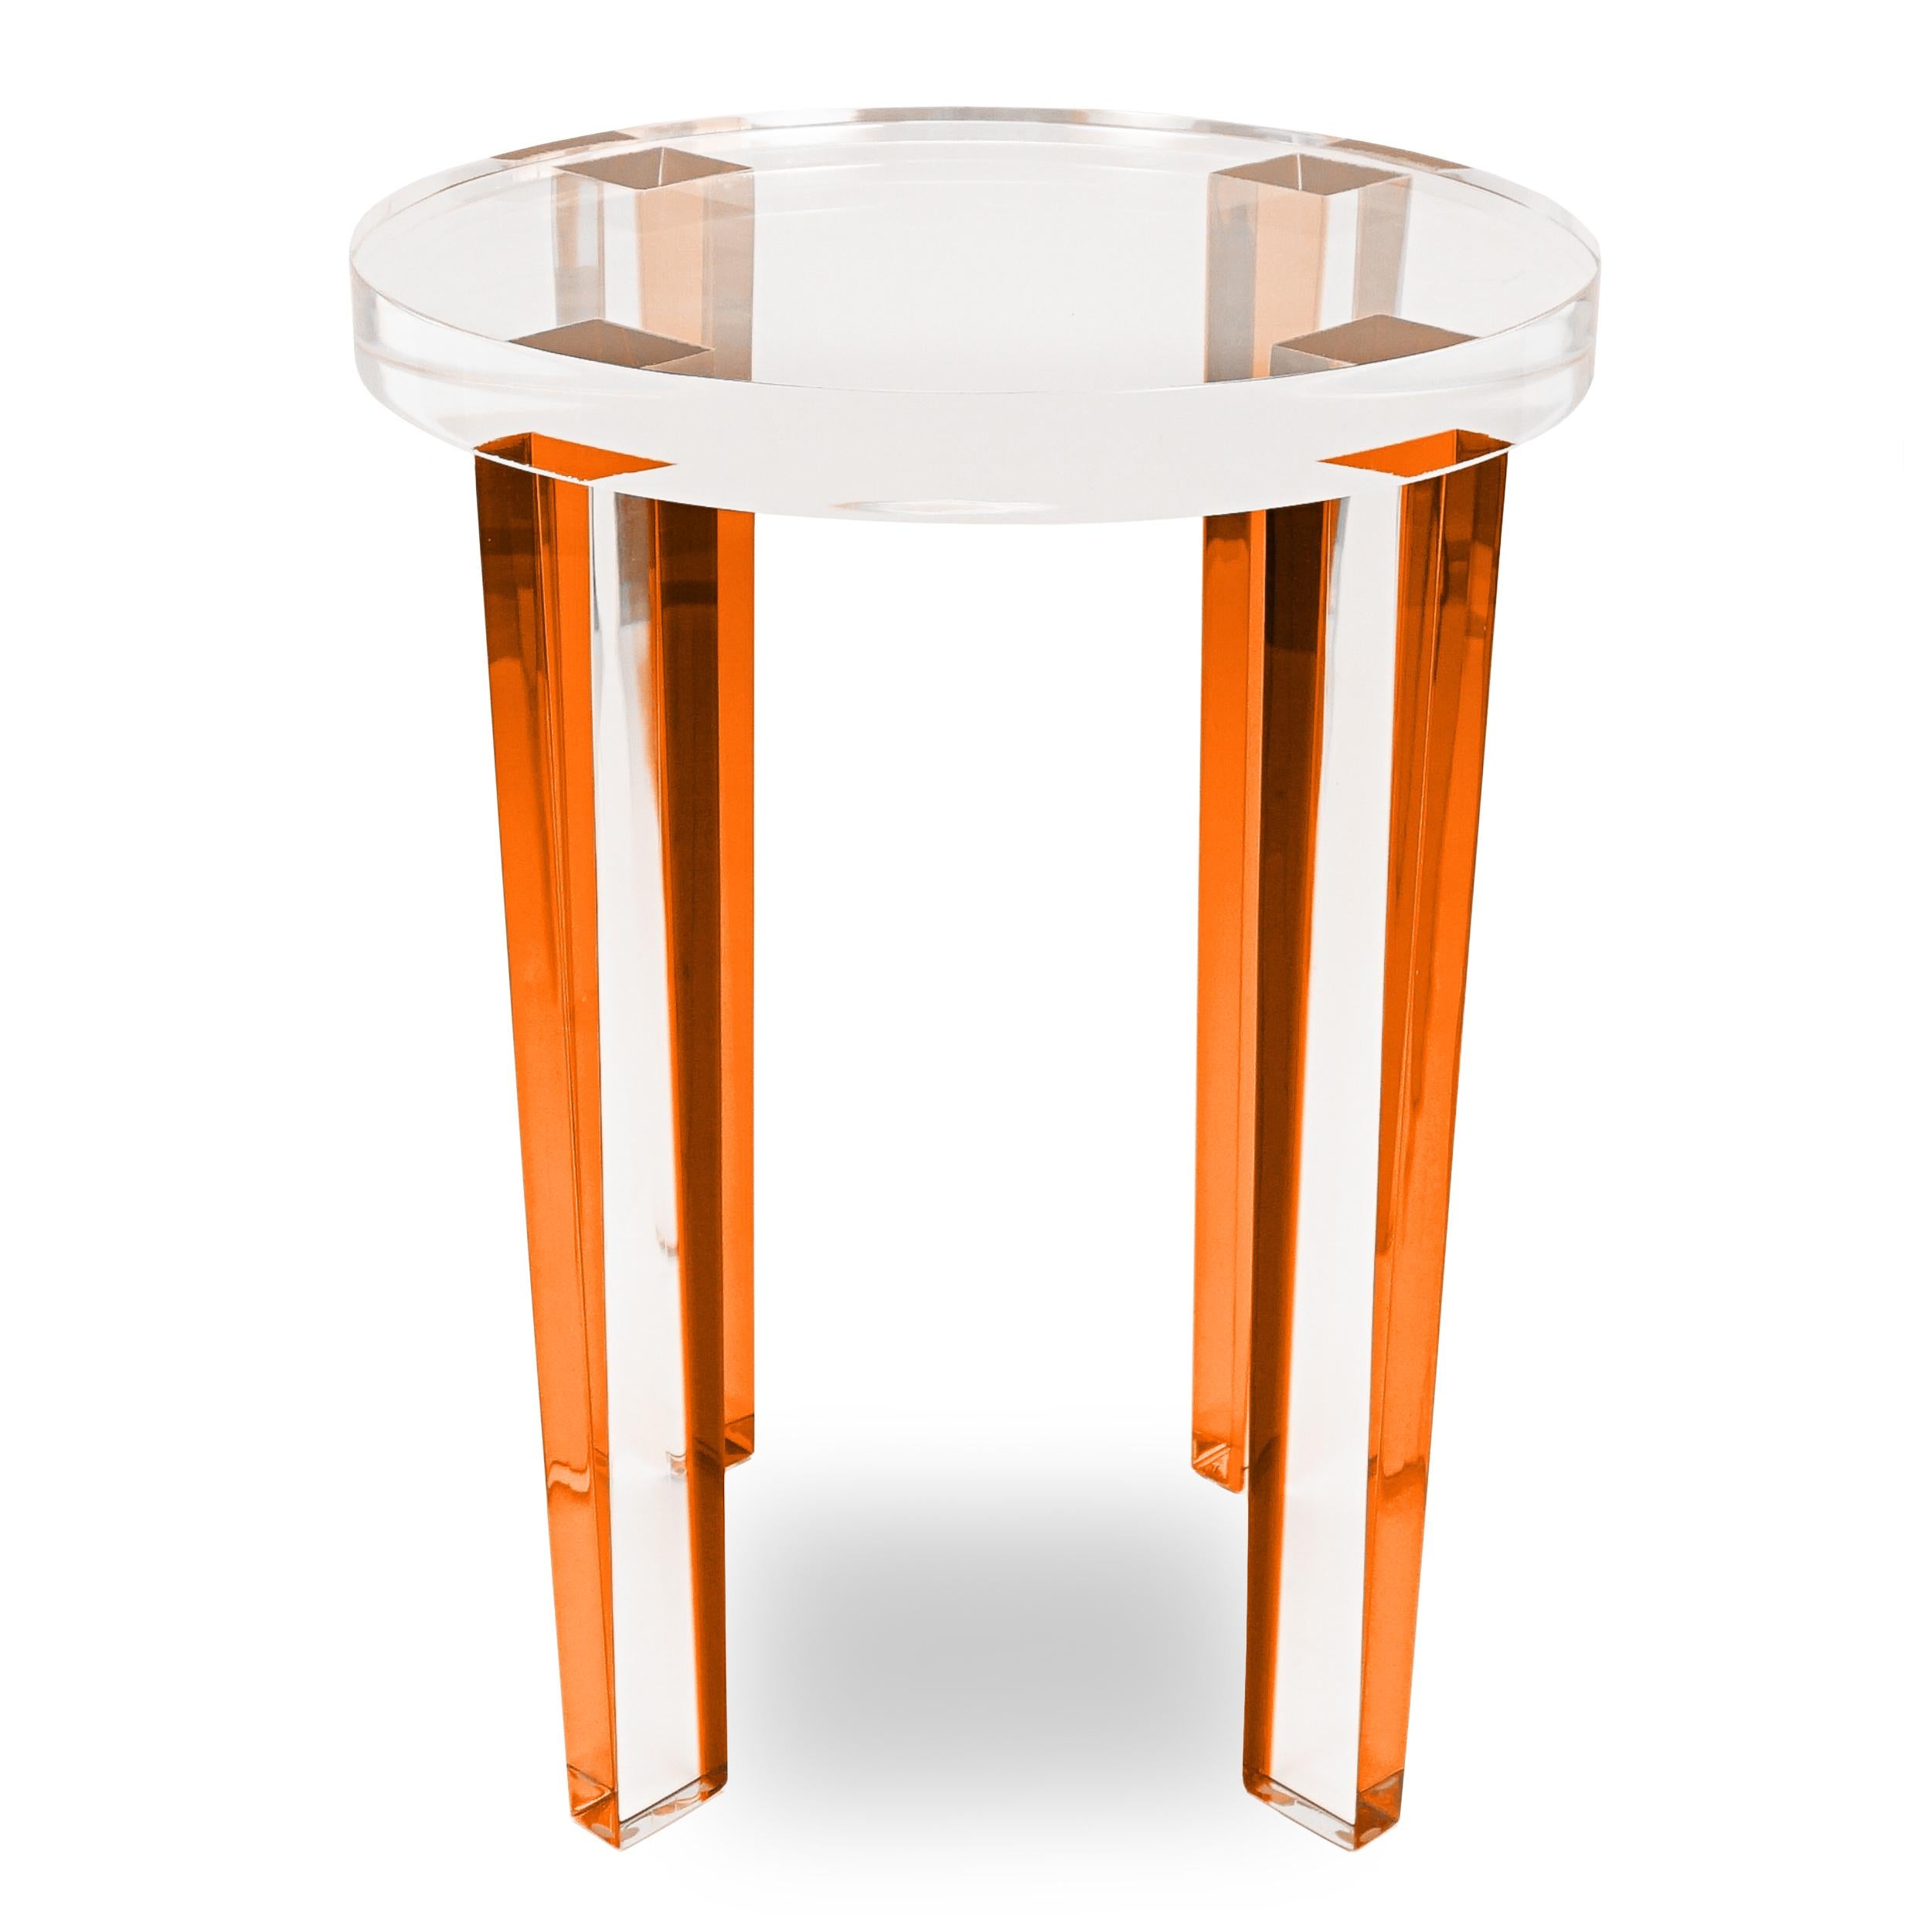 This round lucite side table has been built with orange colored Lucite legs and a clear Lucite top. This little side table will reflect light and create a big impact.

Overall: 15”Dia. x 19”H

Price As Shown: $1,850 each

2023 - Available Right Now